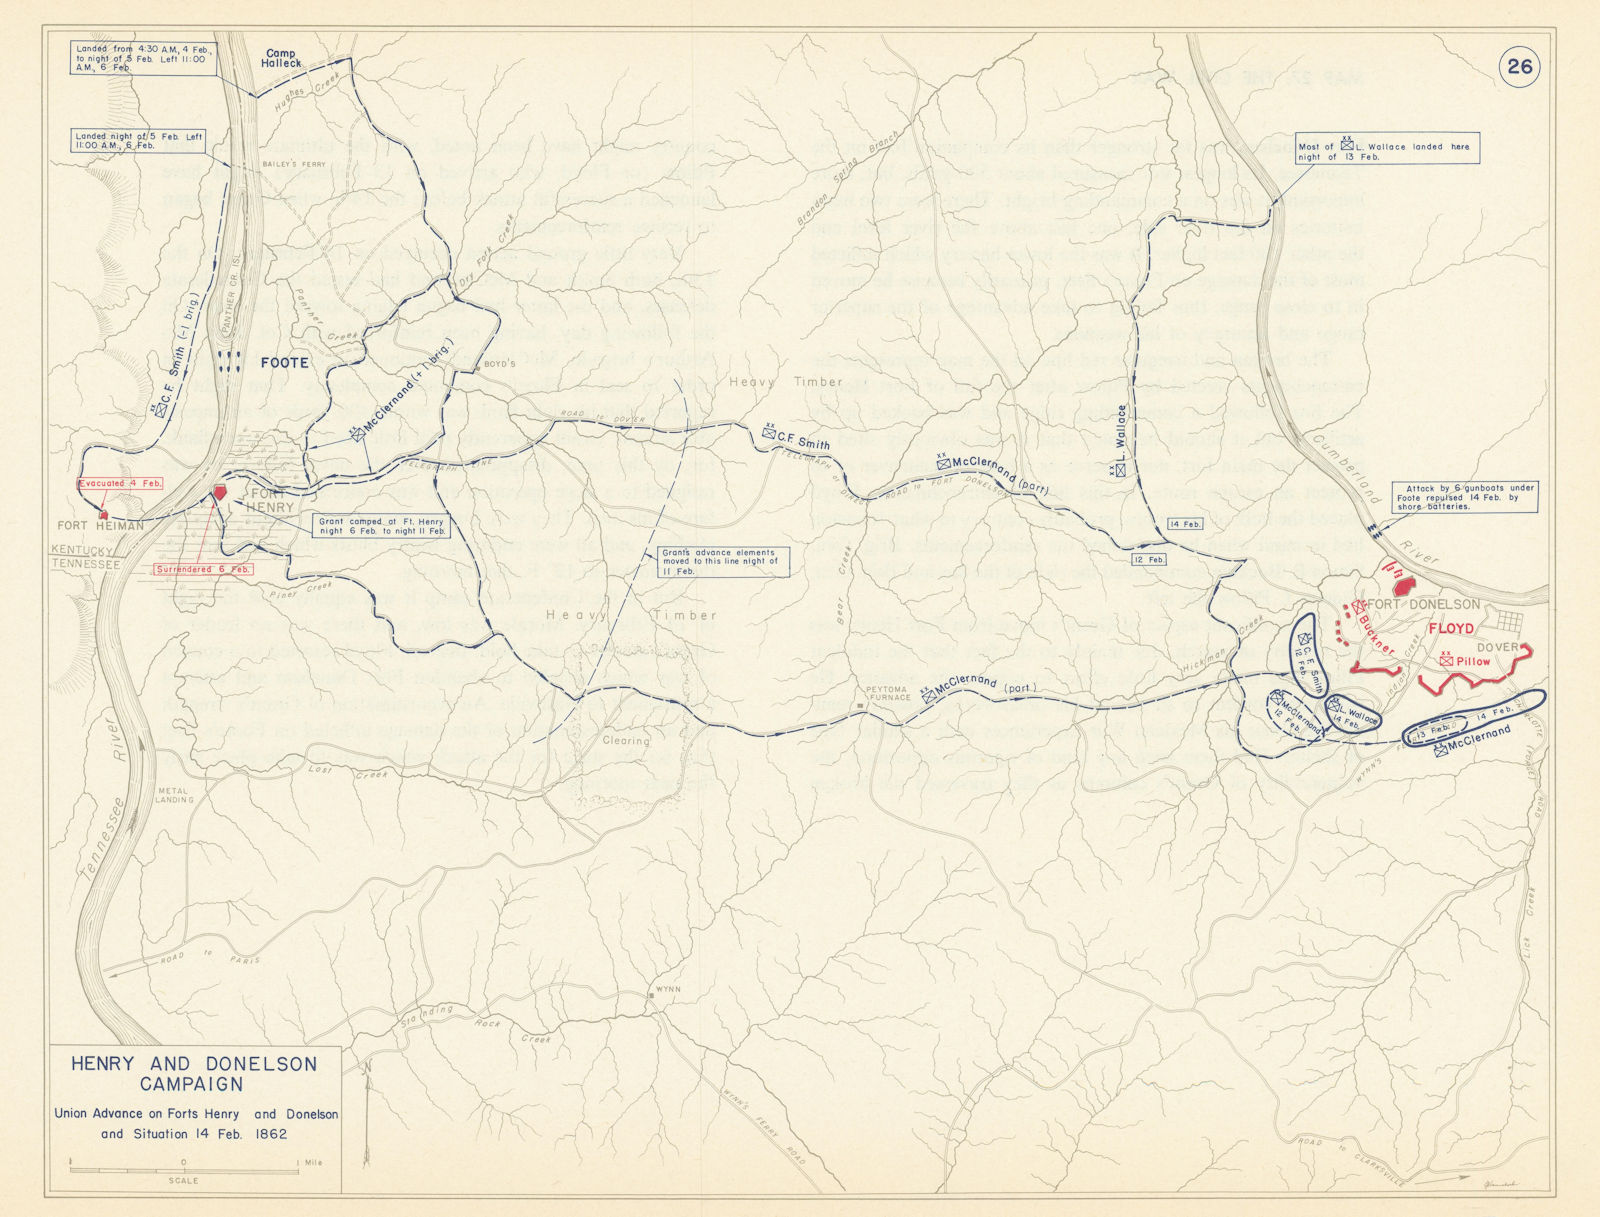 American Civil War. 14 Feb 1862 Union advance to Forts Henry & Donelson 1959 map